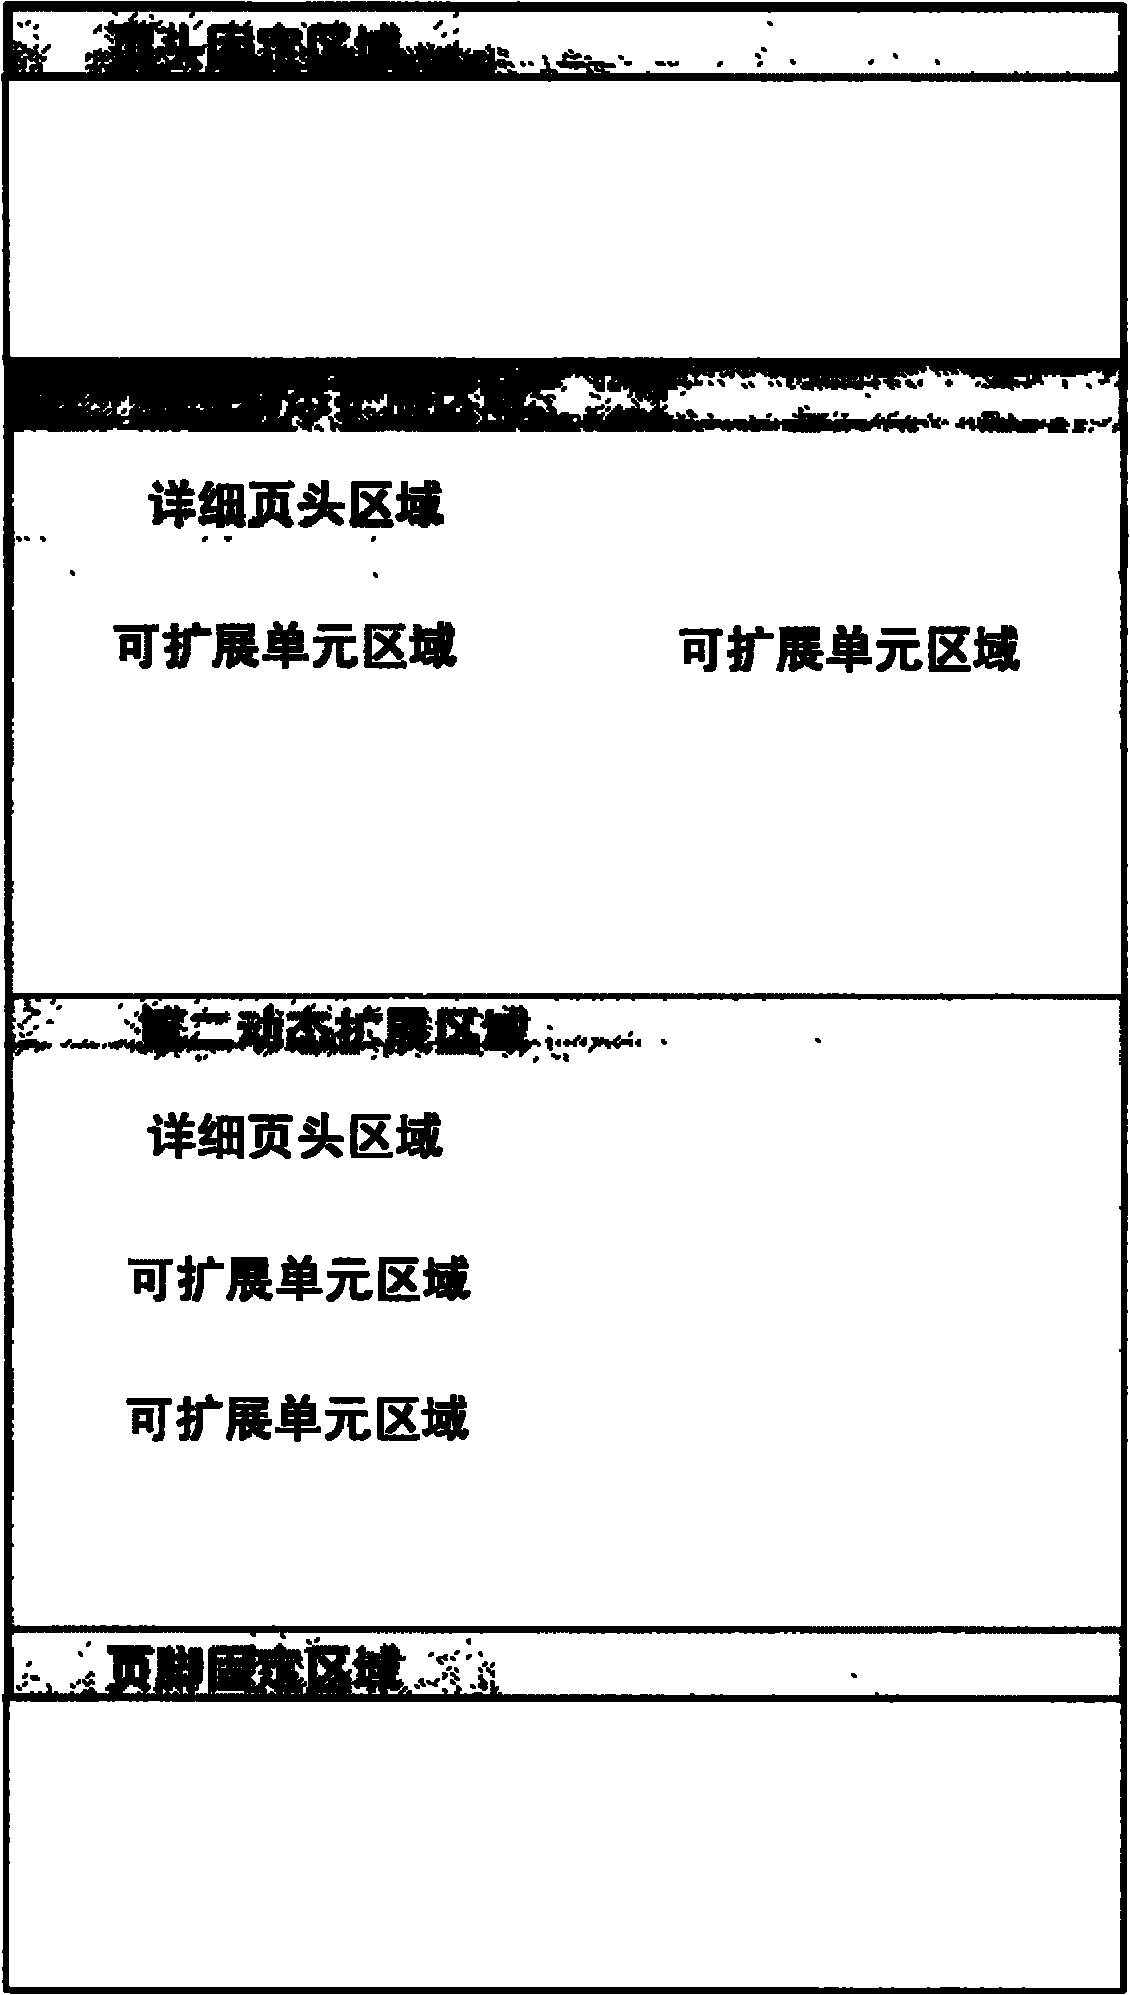 Method for editing tag template